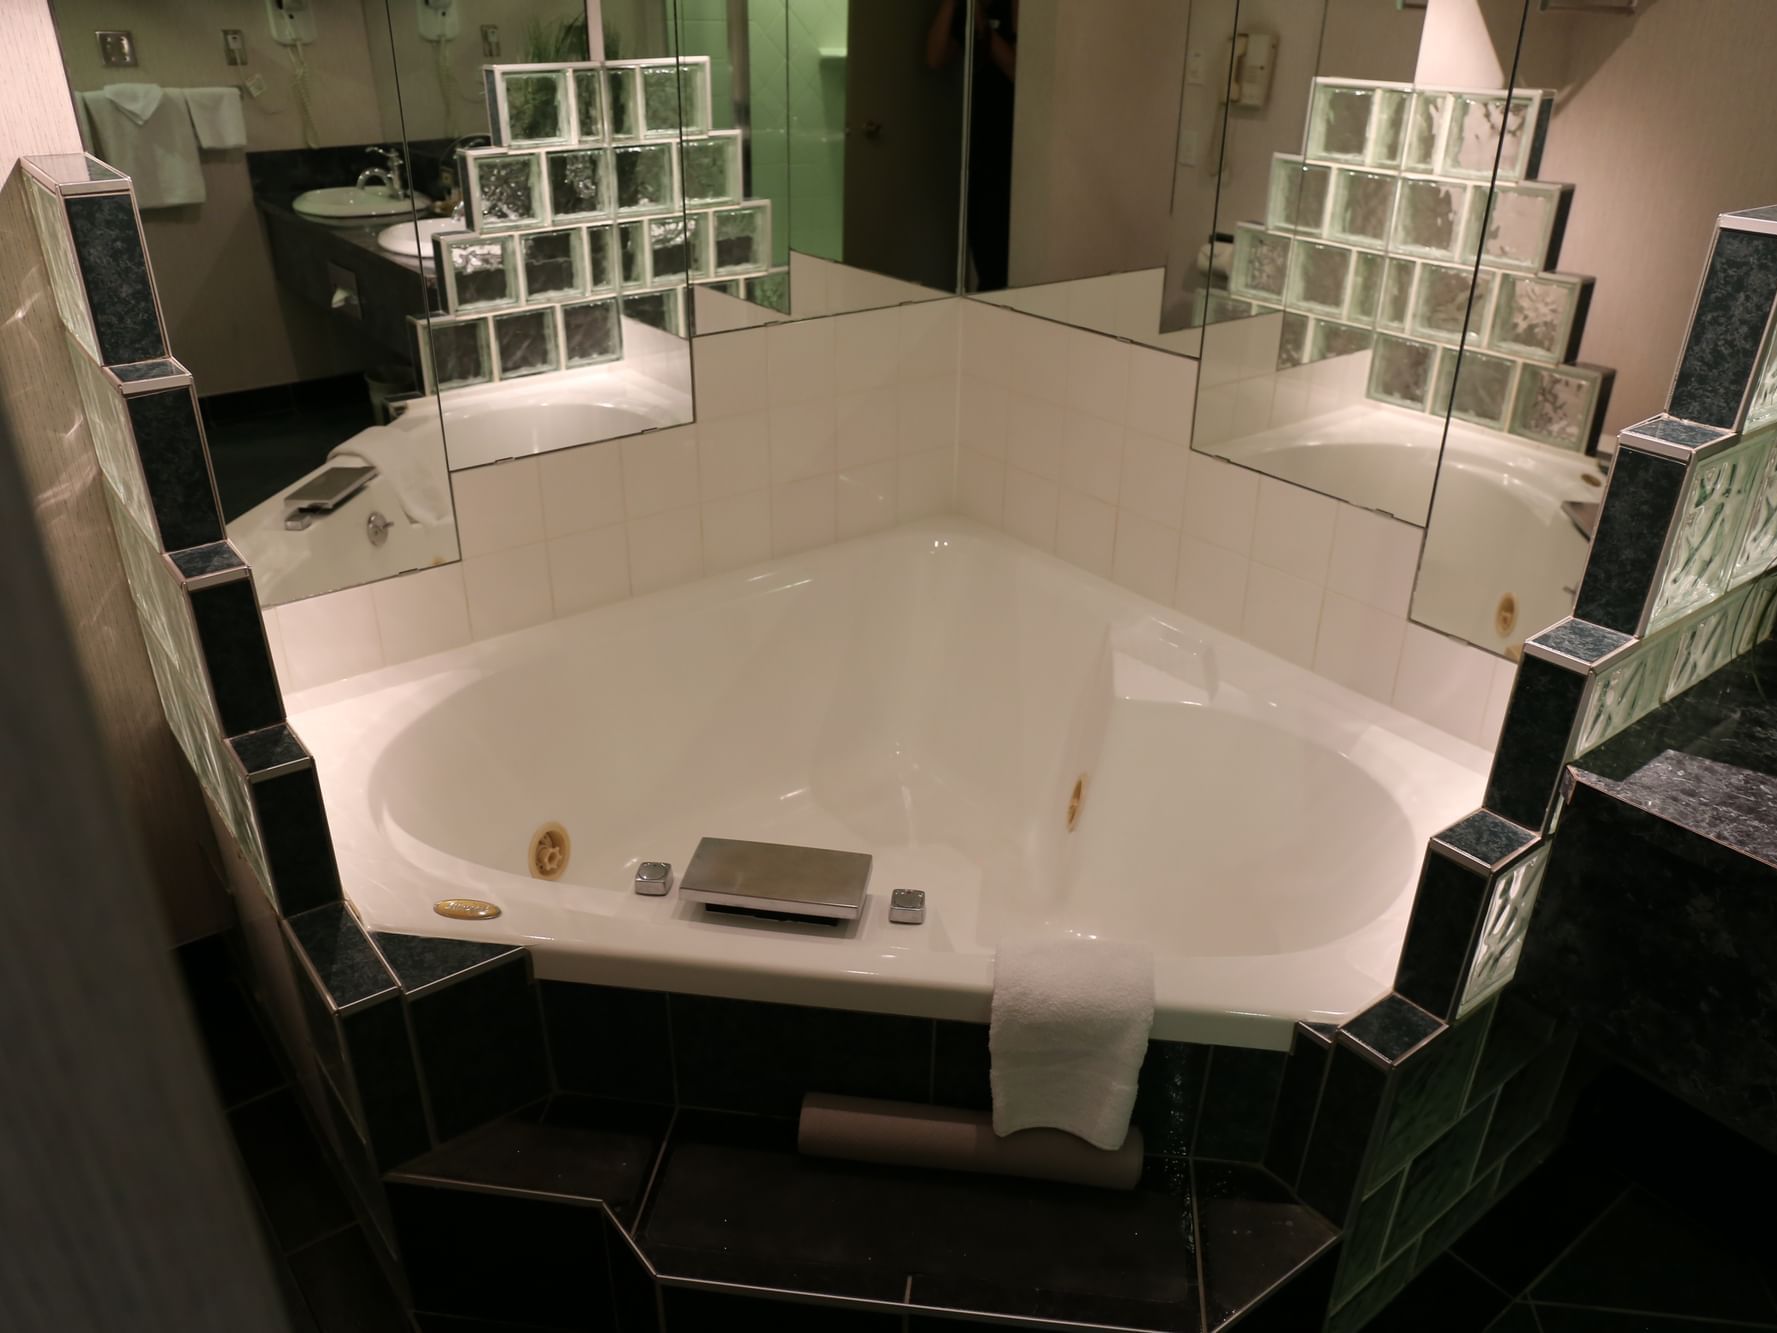 Jacuzzi in Premier Suite at Carriage House Hotel